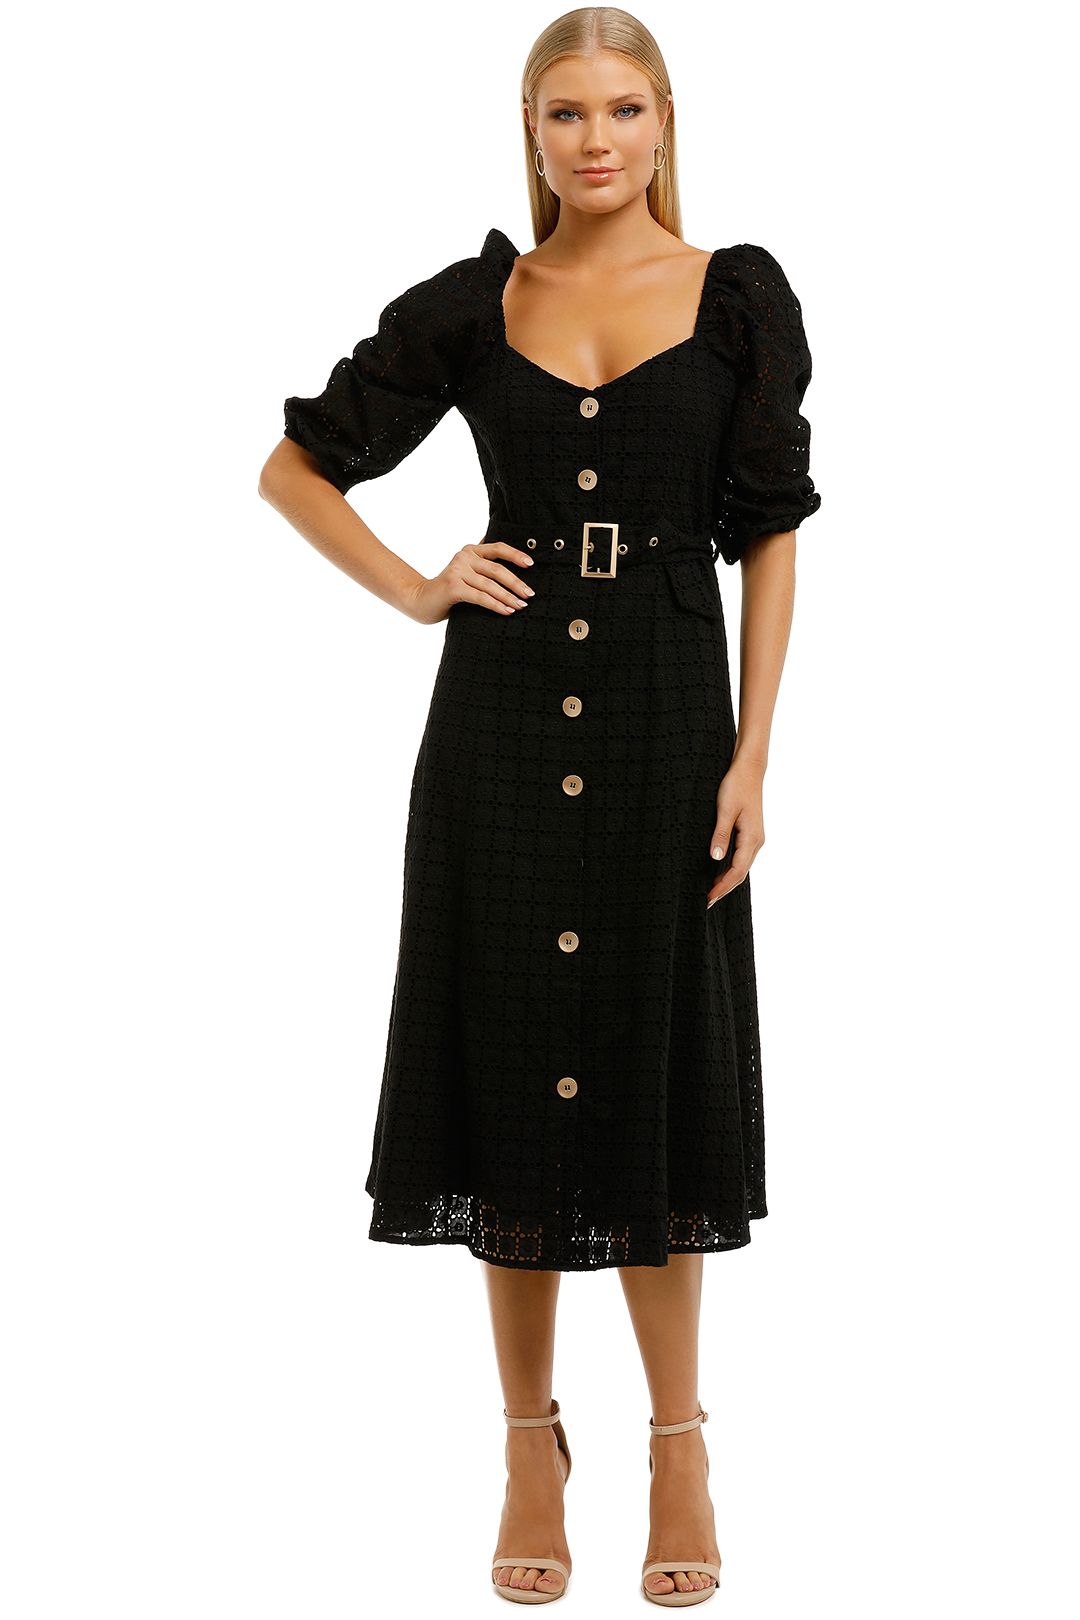 We-Are-Kindred-Vienna-Midi-Dress-Noir-Front